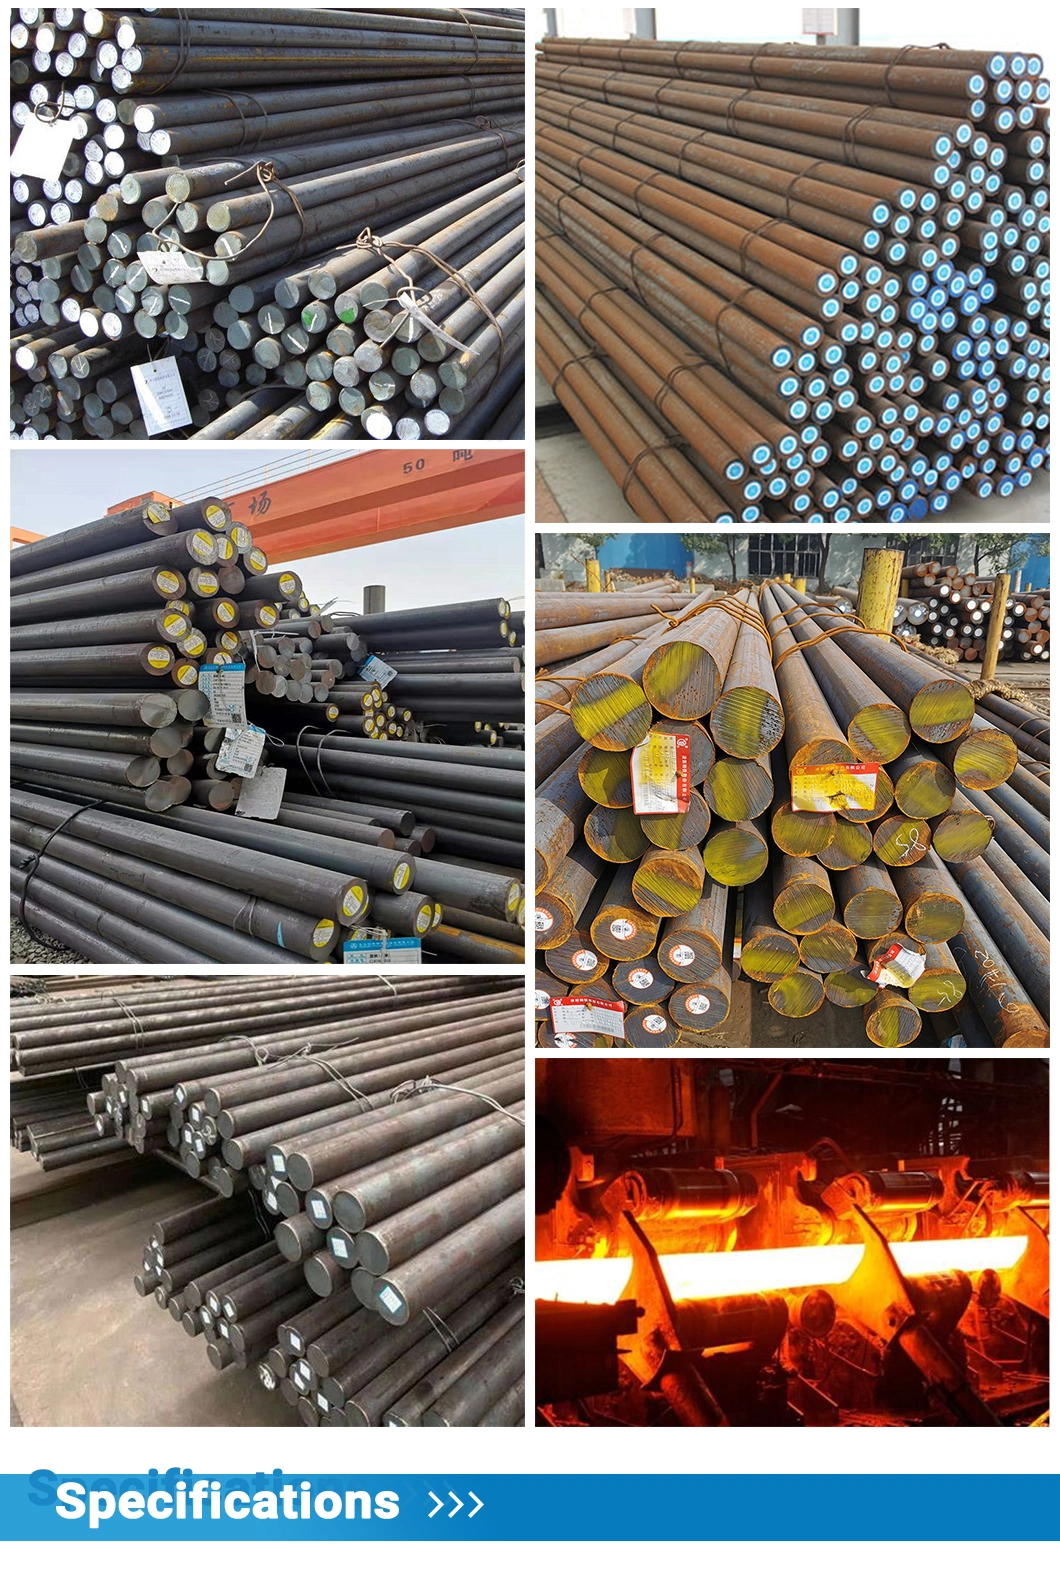 ASTM A36 4130 4140 4150 4340 10mm 1045 1020 Mild Hot Rolled Iron Carbon Steel Rod Round Bar